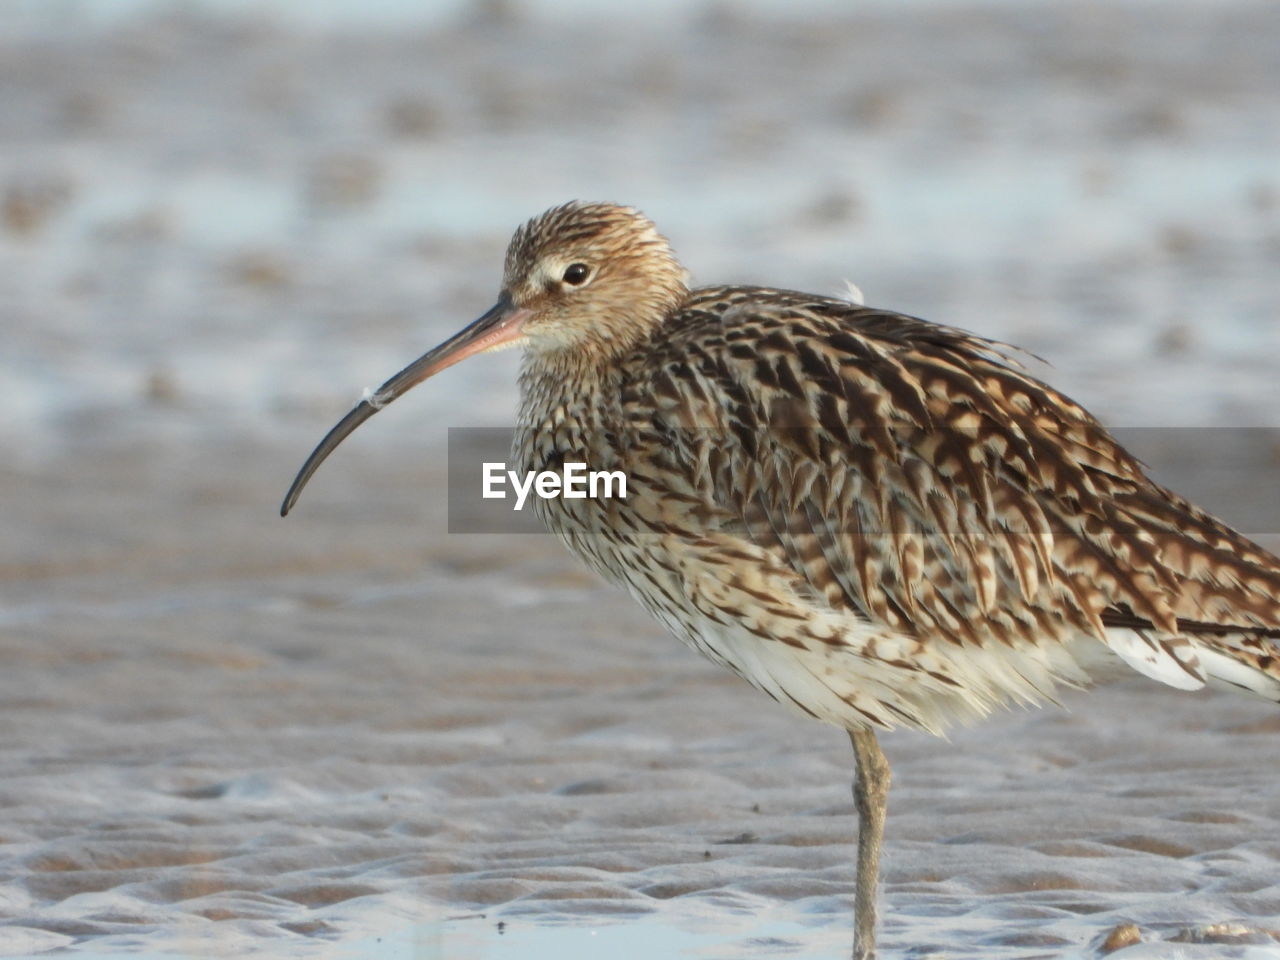 Curlew by sea